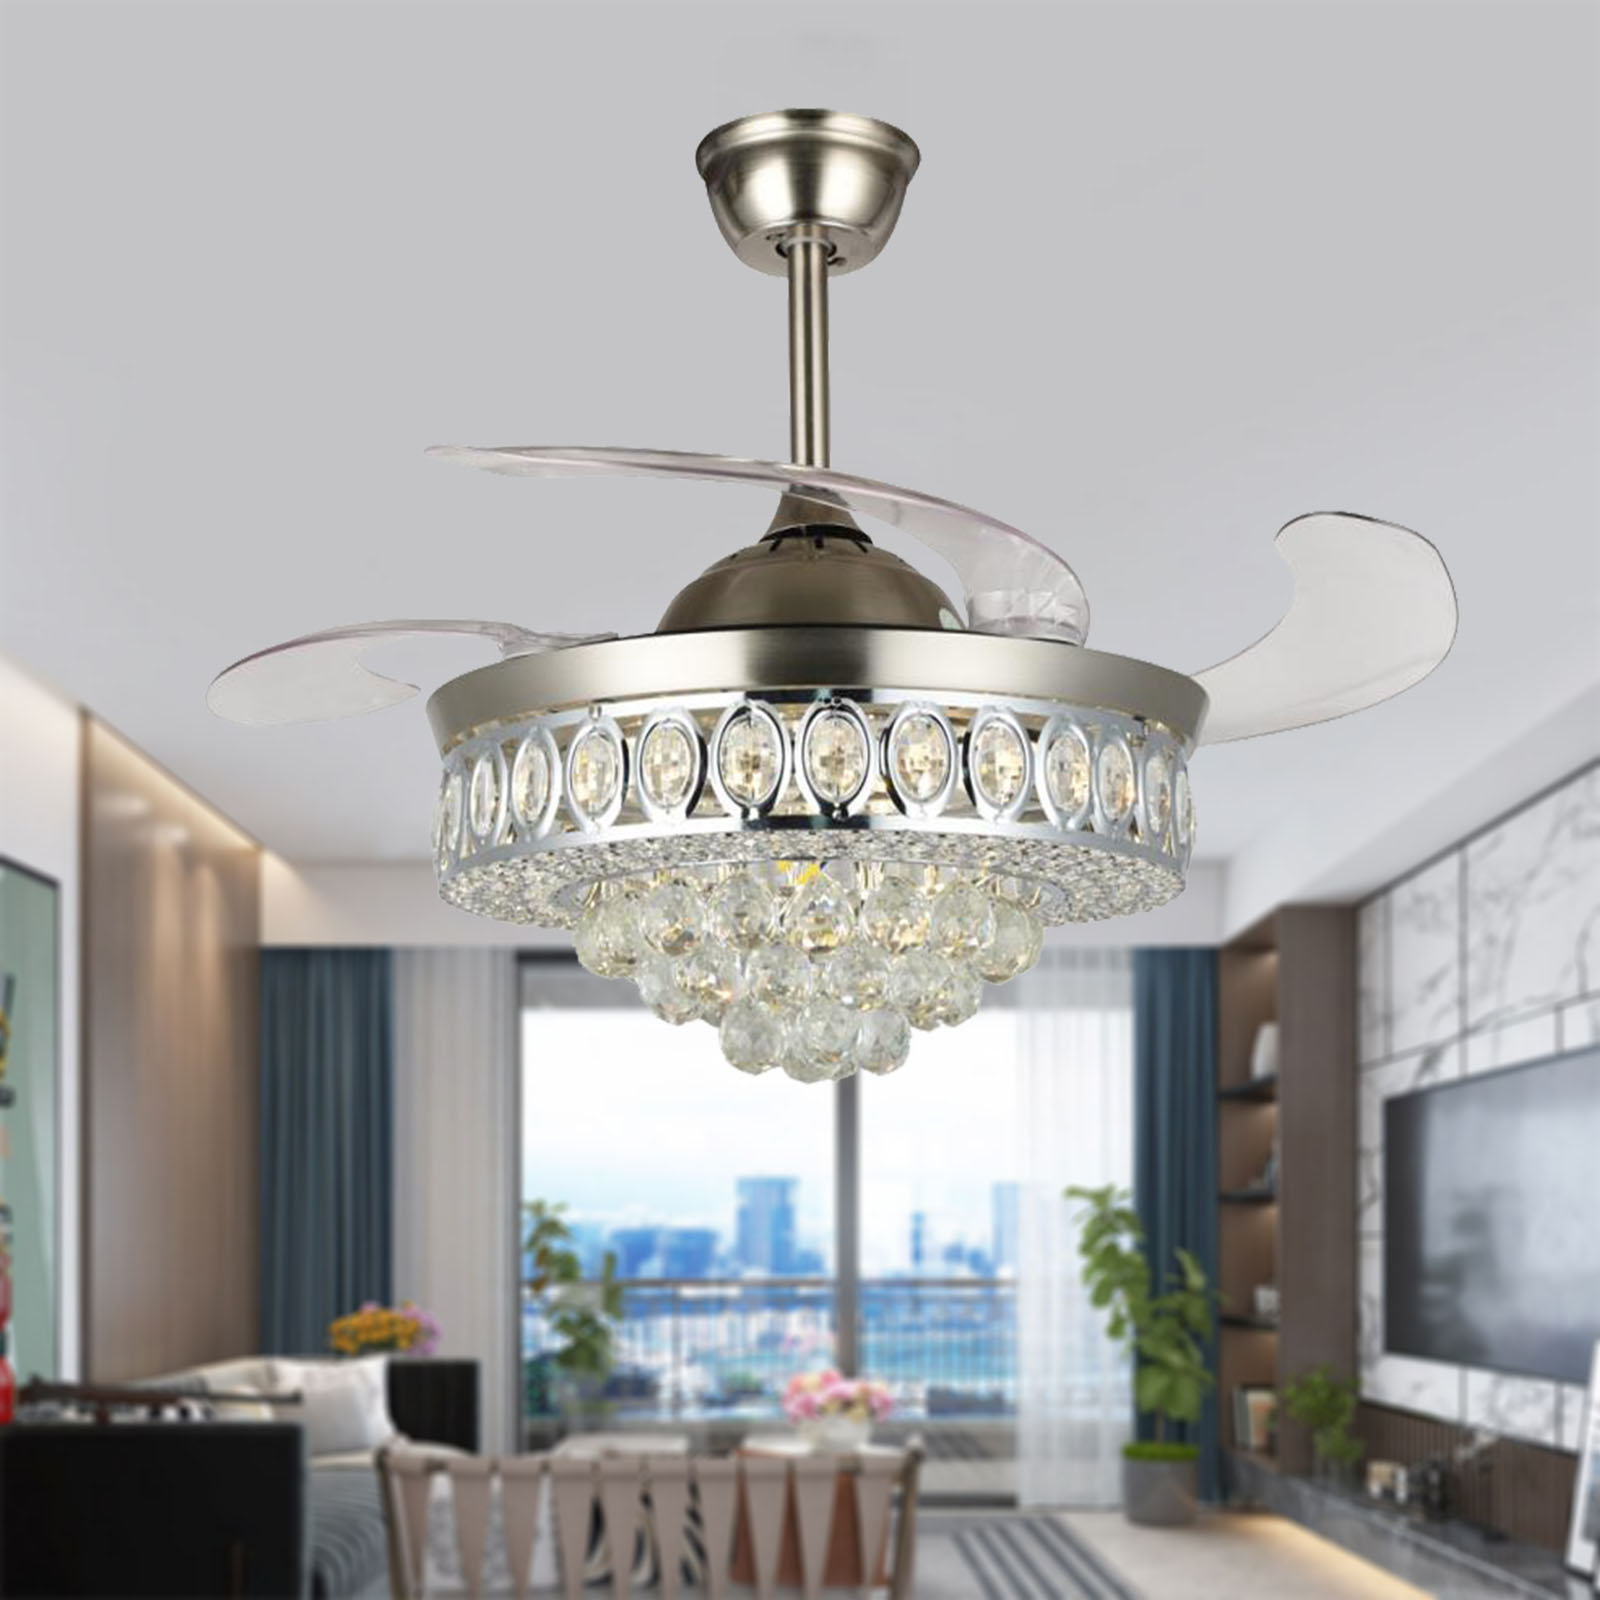 42" Remote Invisible Ceiling Fan Light LED Chandelier w/Retractable Blades Lamps 